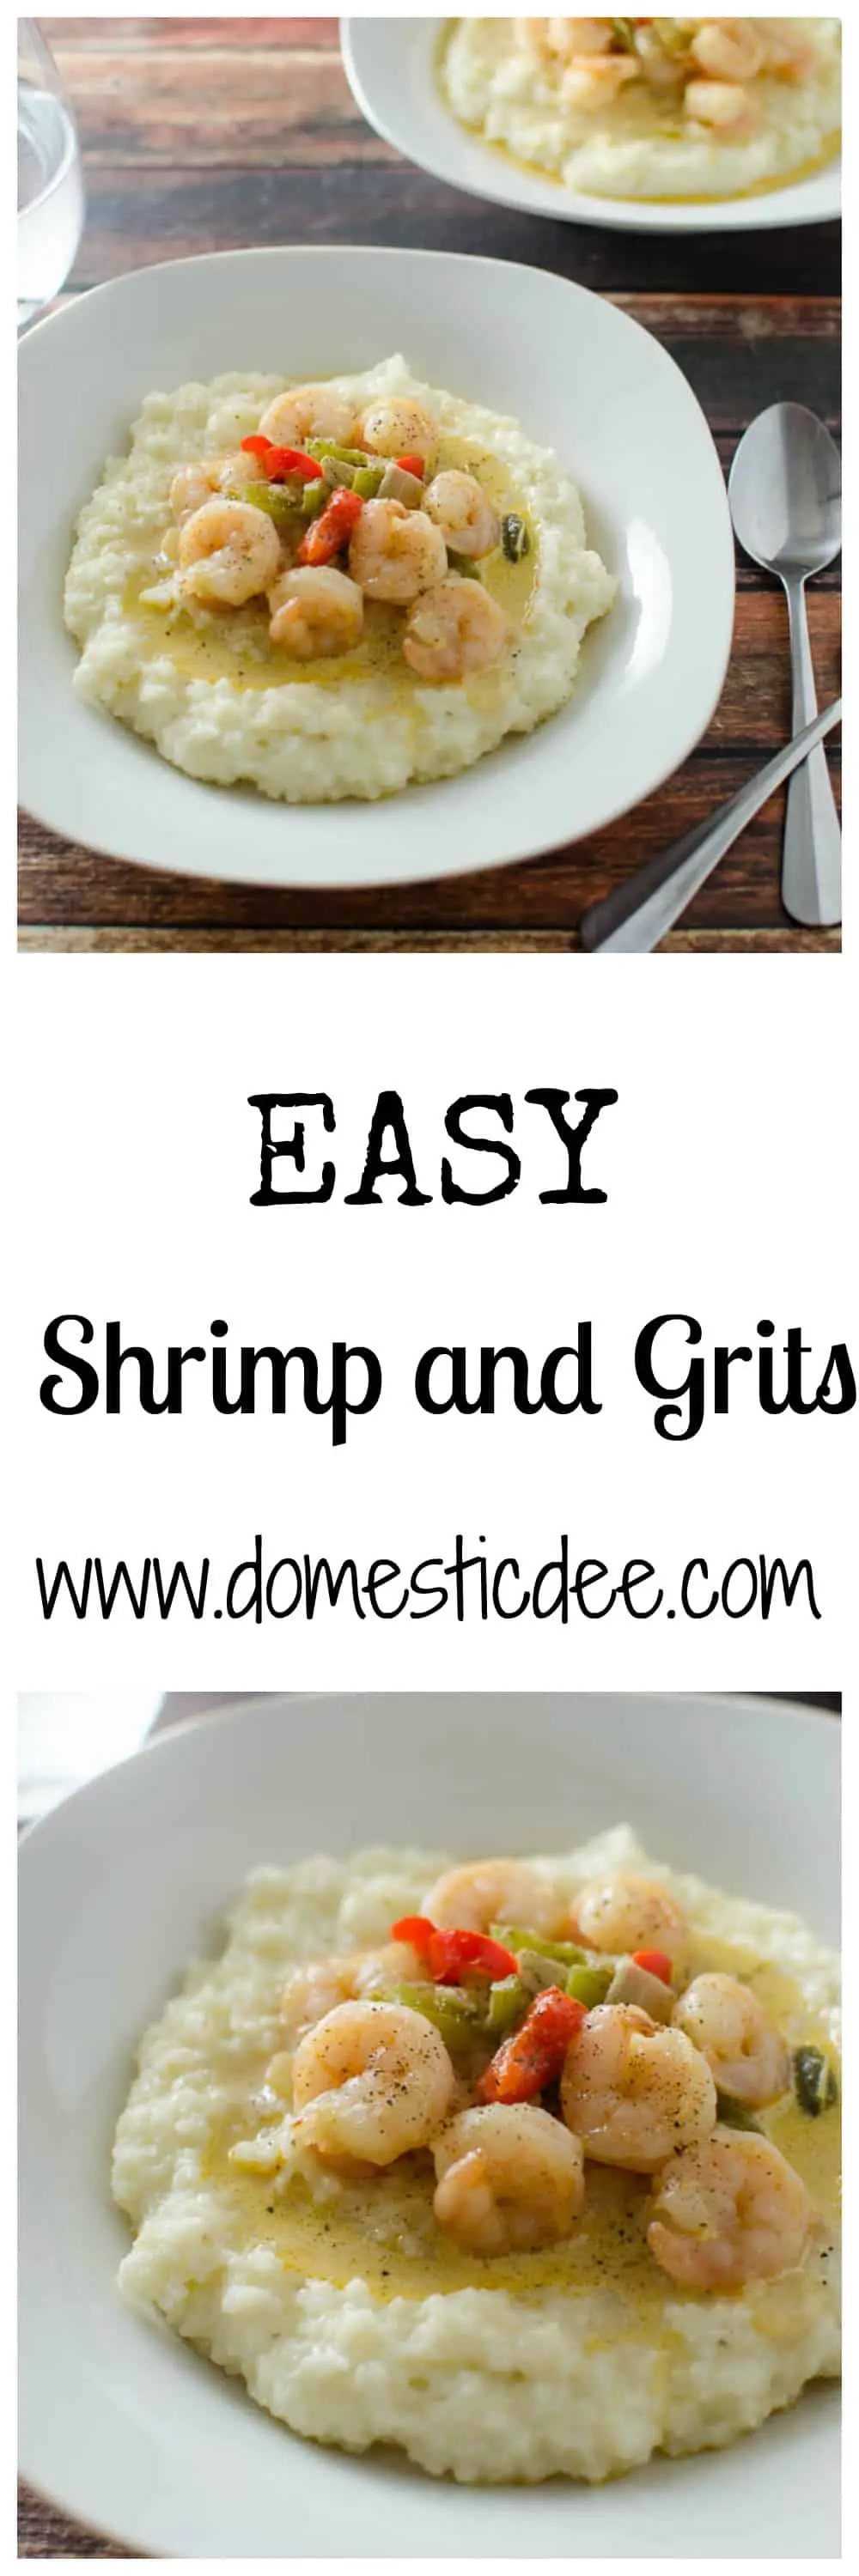 Easy shrimp and Grits- Spice up your weeknight menu with this quick and easy shrimp and grits recipe. I www.domesticdee.com